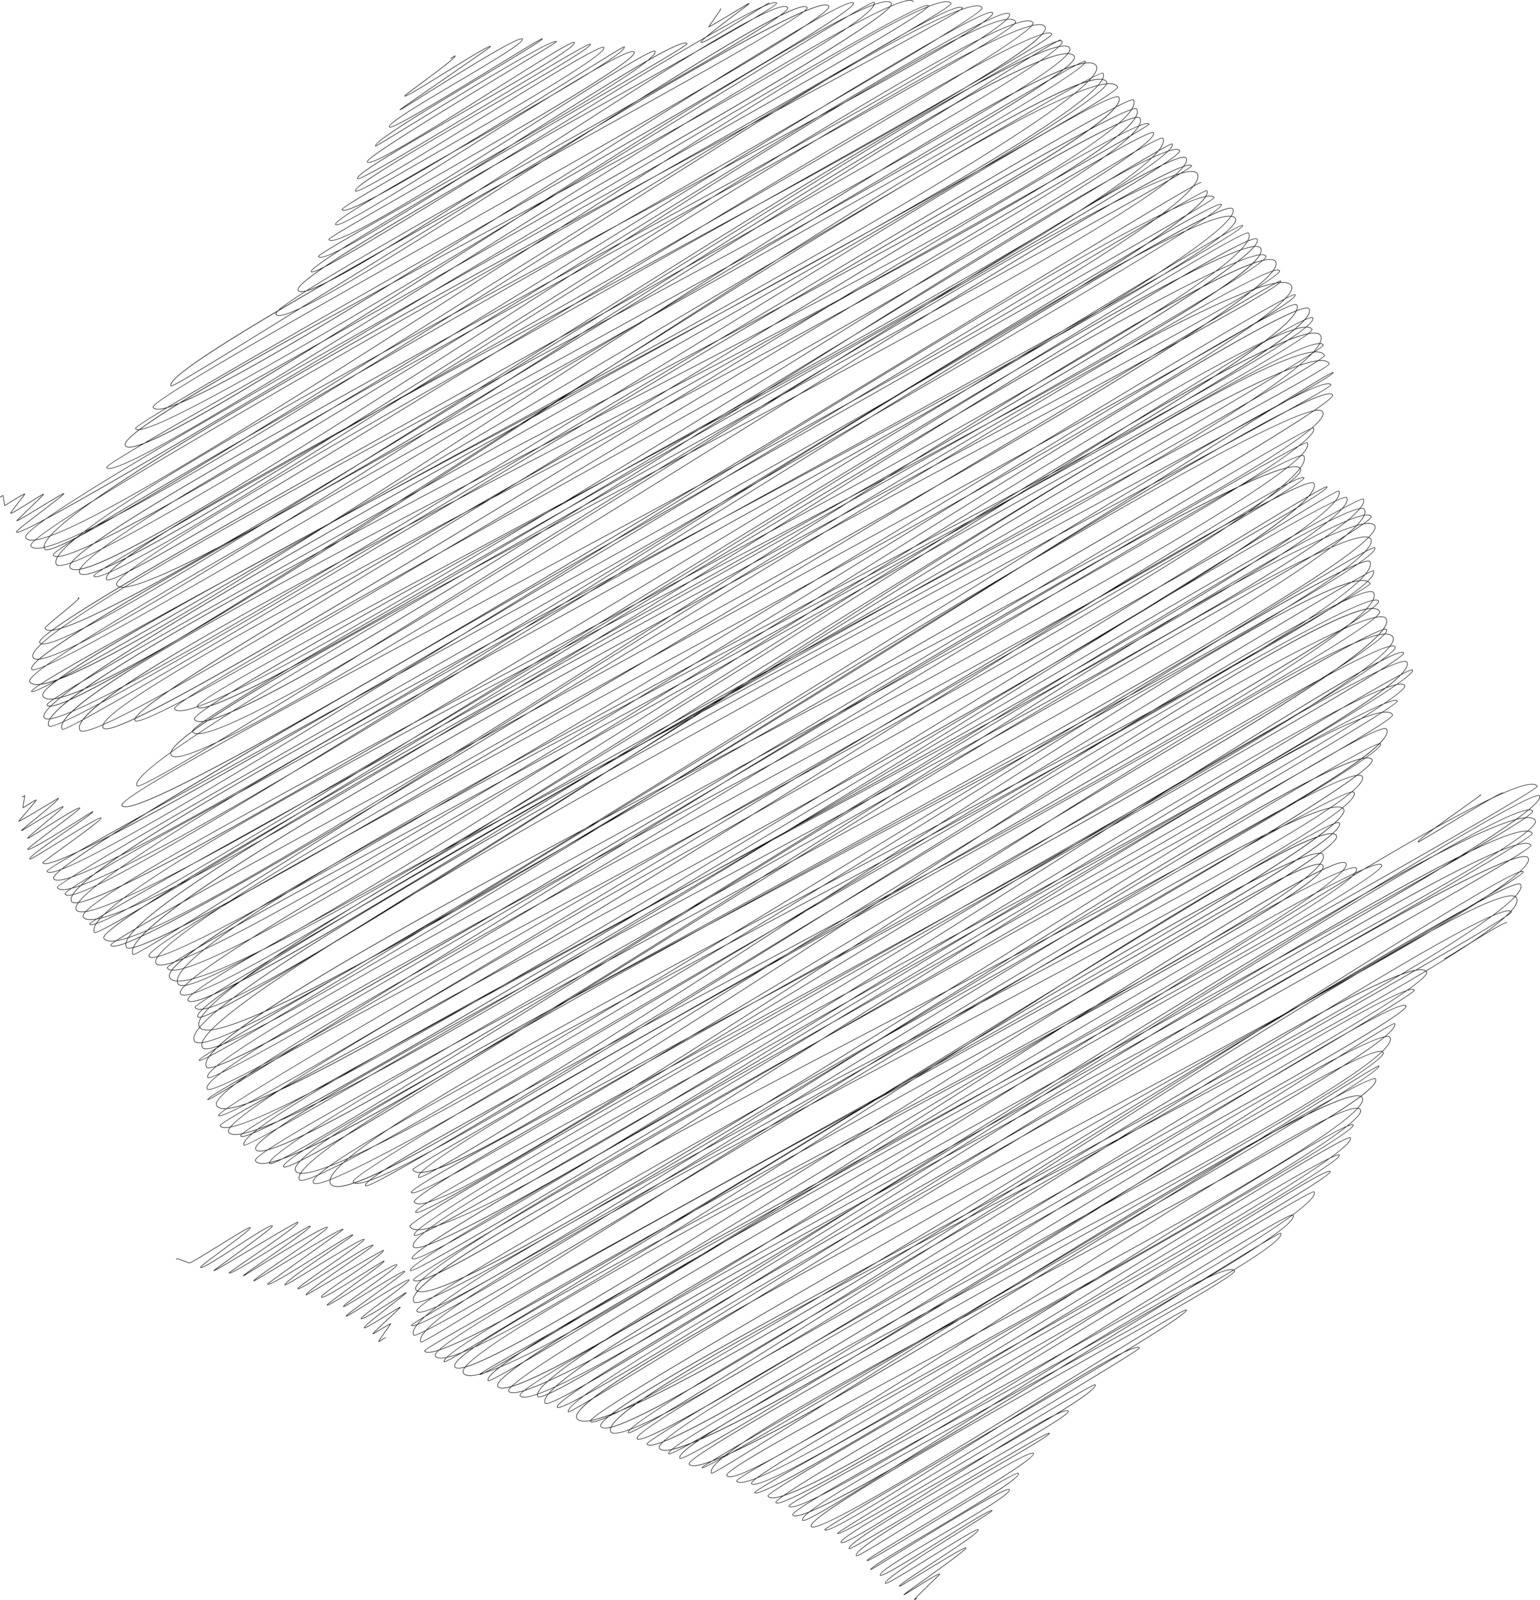 Sierra Leone - solid black silhouette map of country area. Simple flat vector illustration.